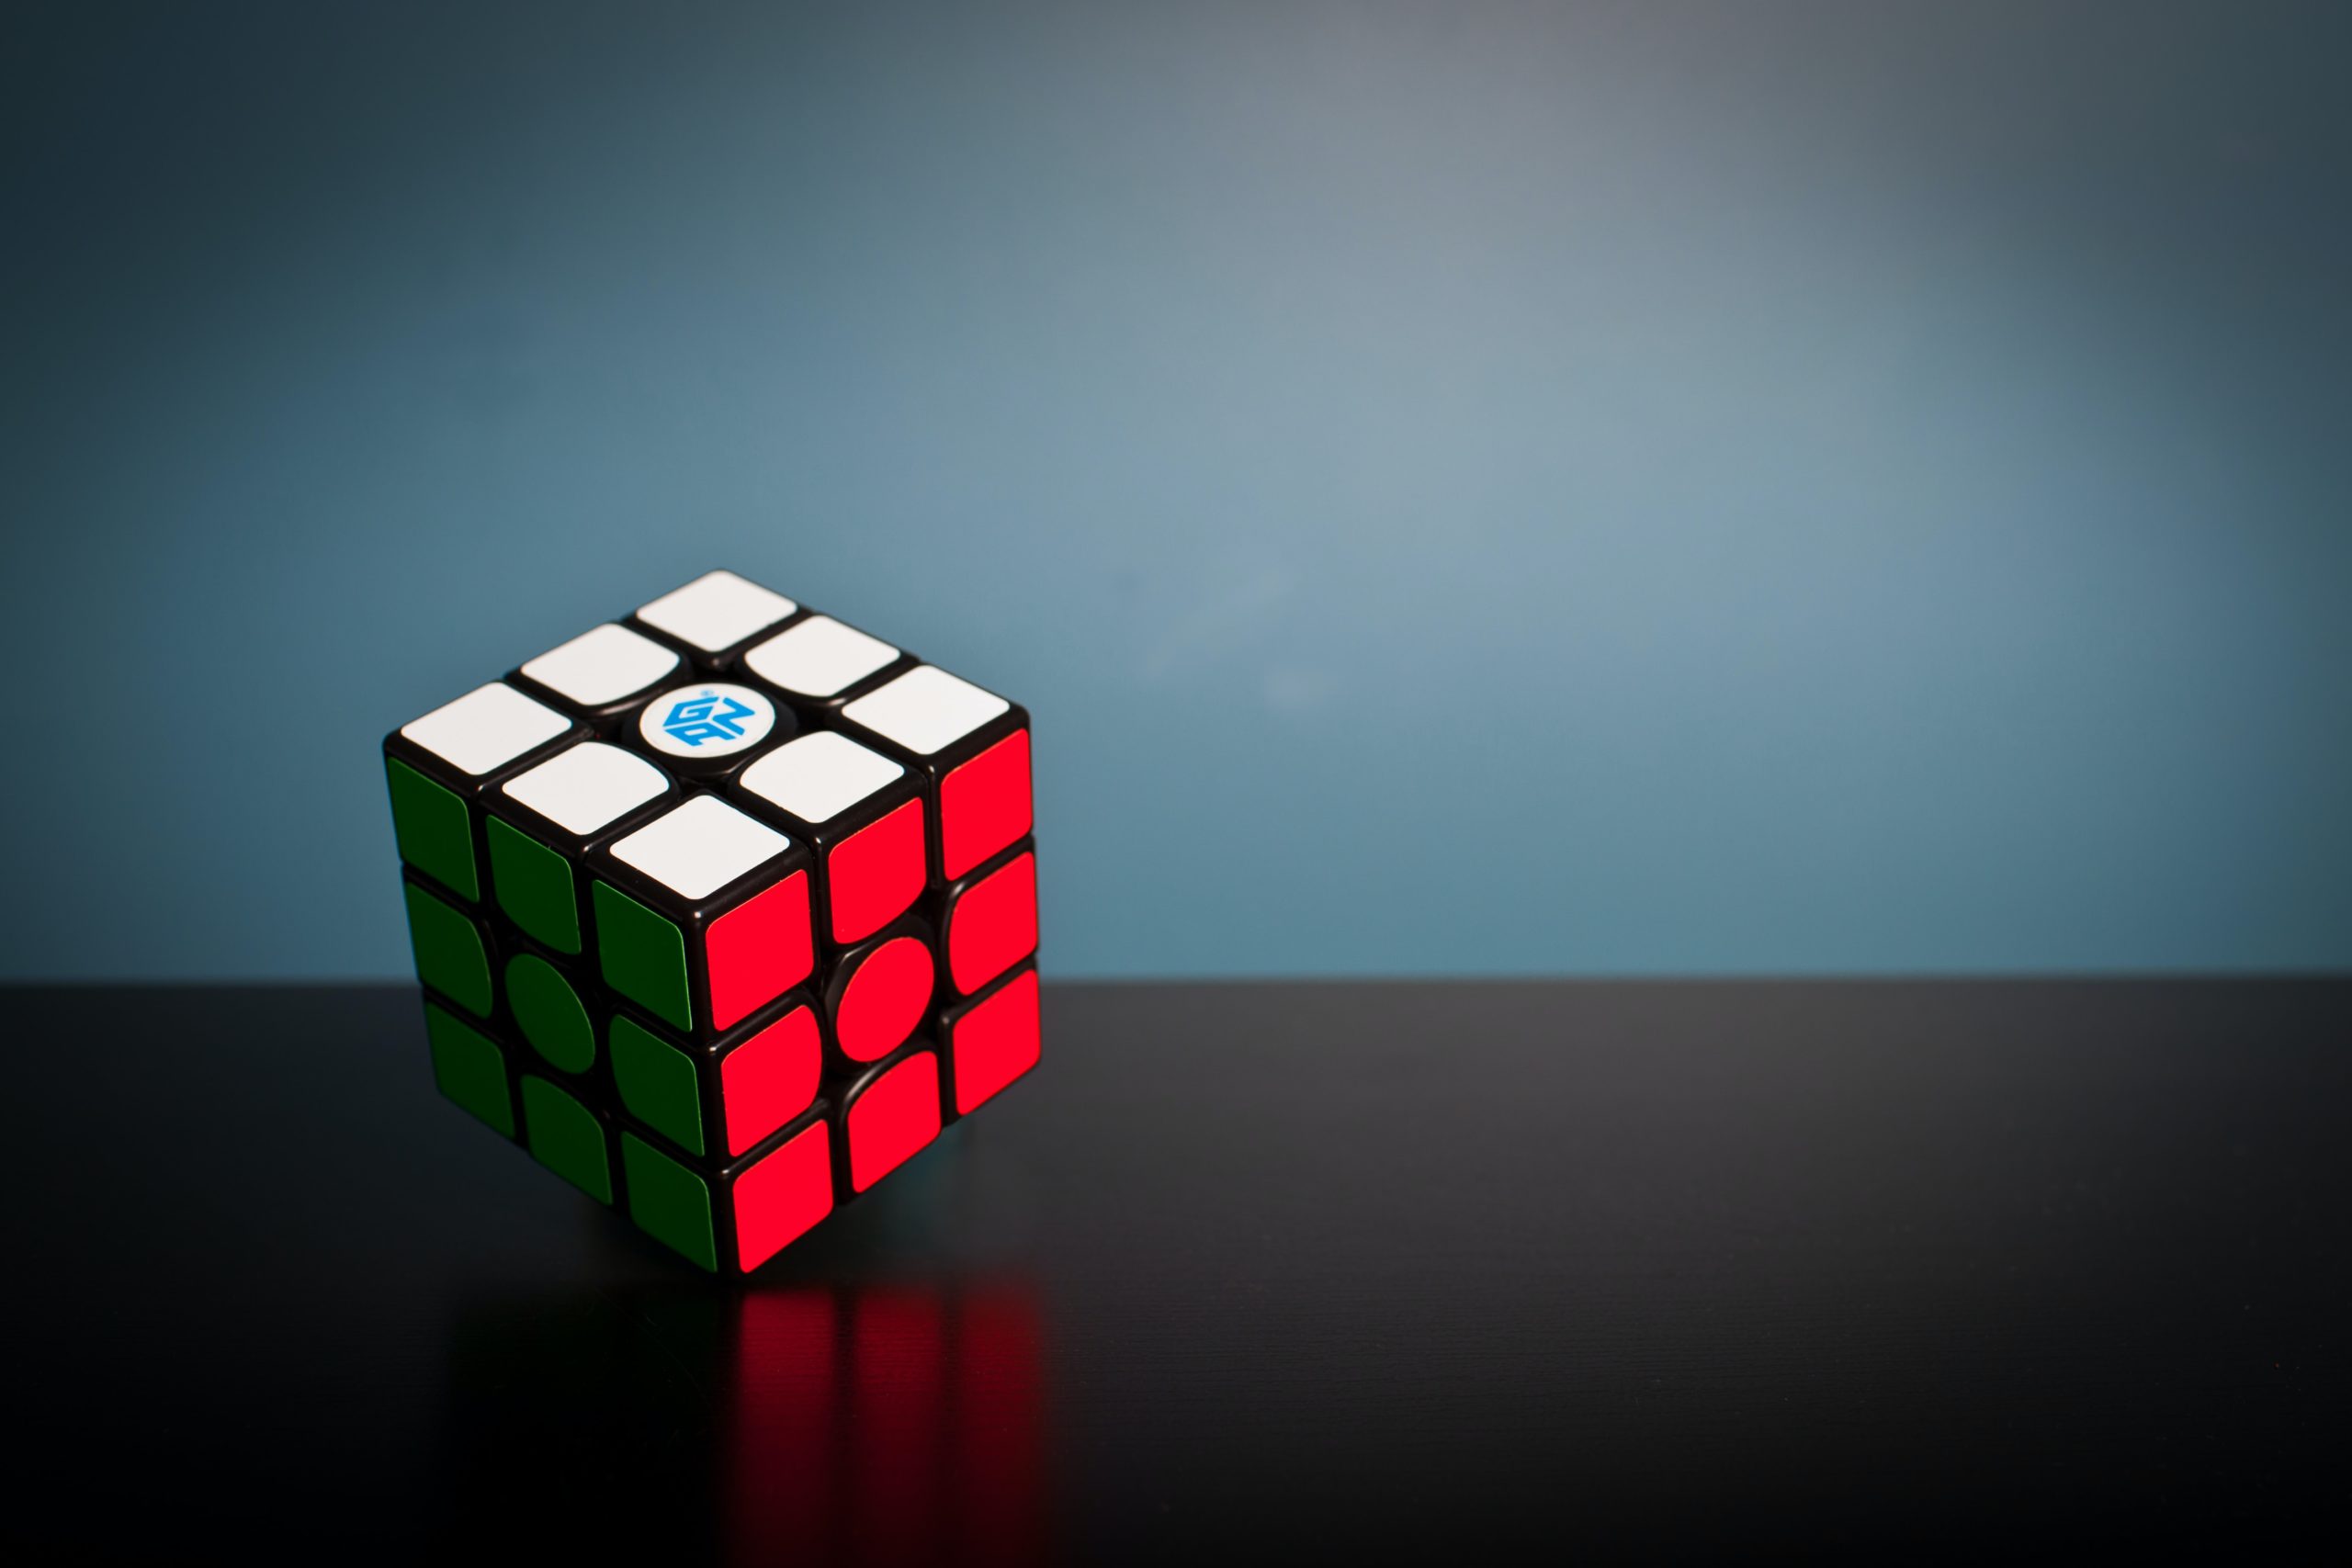 A solved Rubik's Cube spins in an empty background.